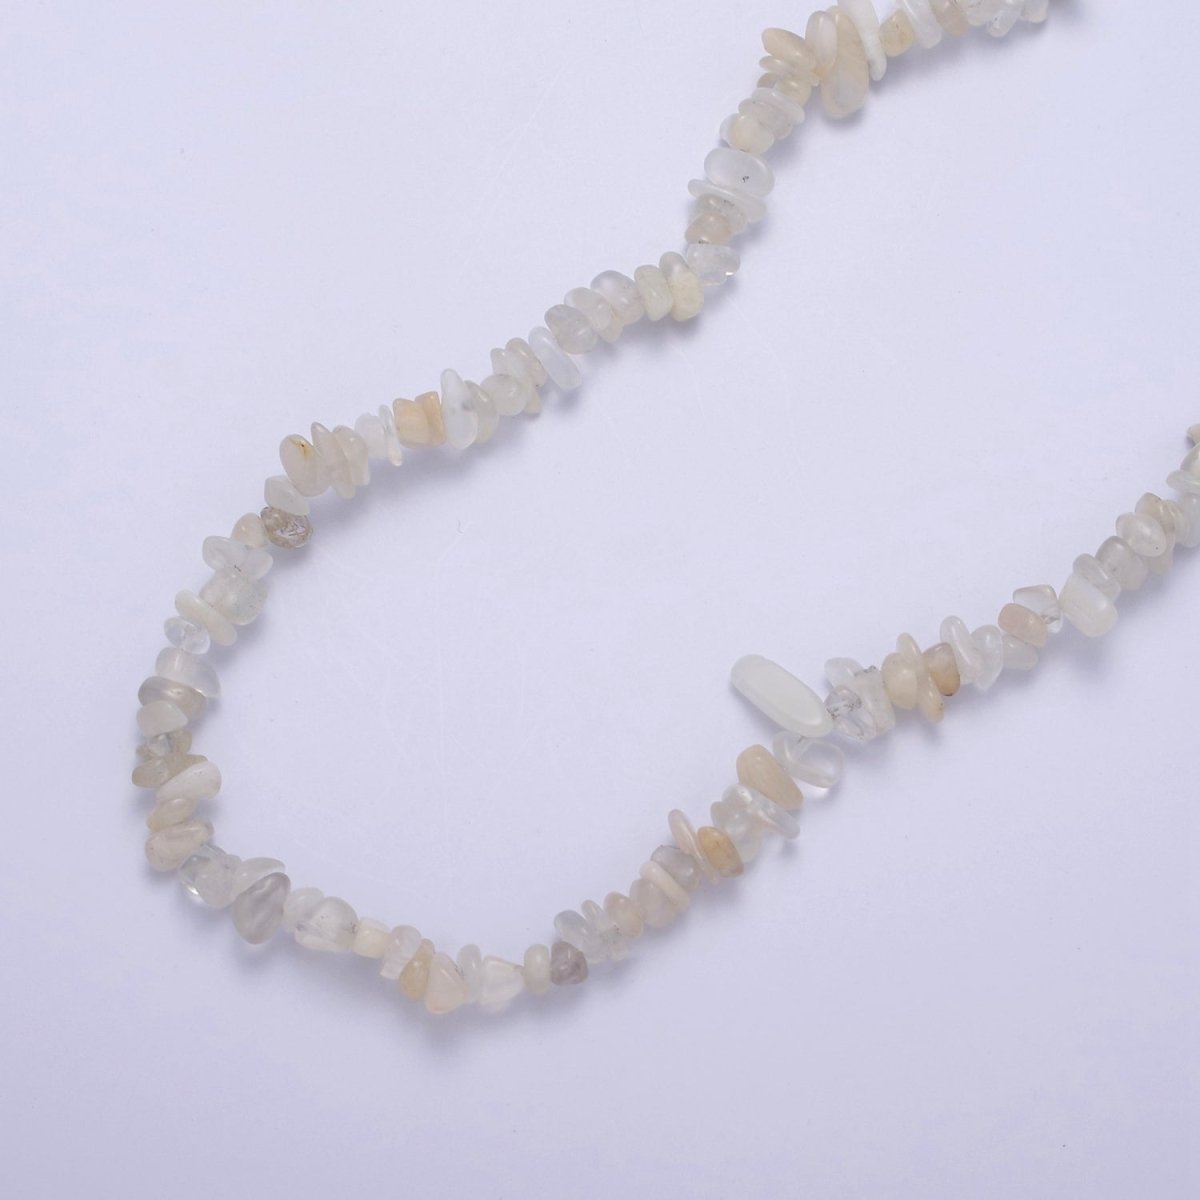 18 Inch Natural Genuine White Moonstone Gemstones Bead Necklace with 2" Extender | WA-633 Clearance Pricing - DLUXCA